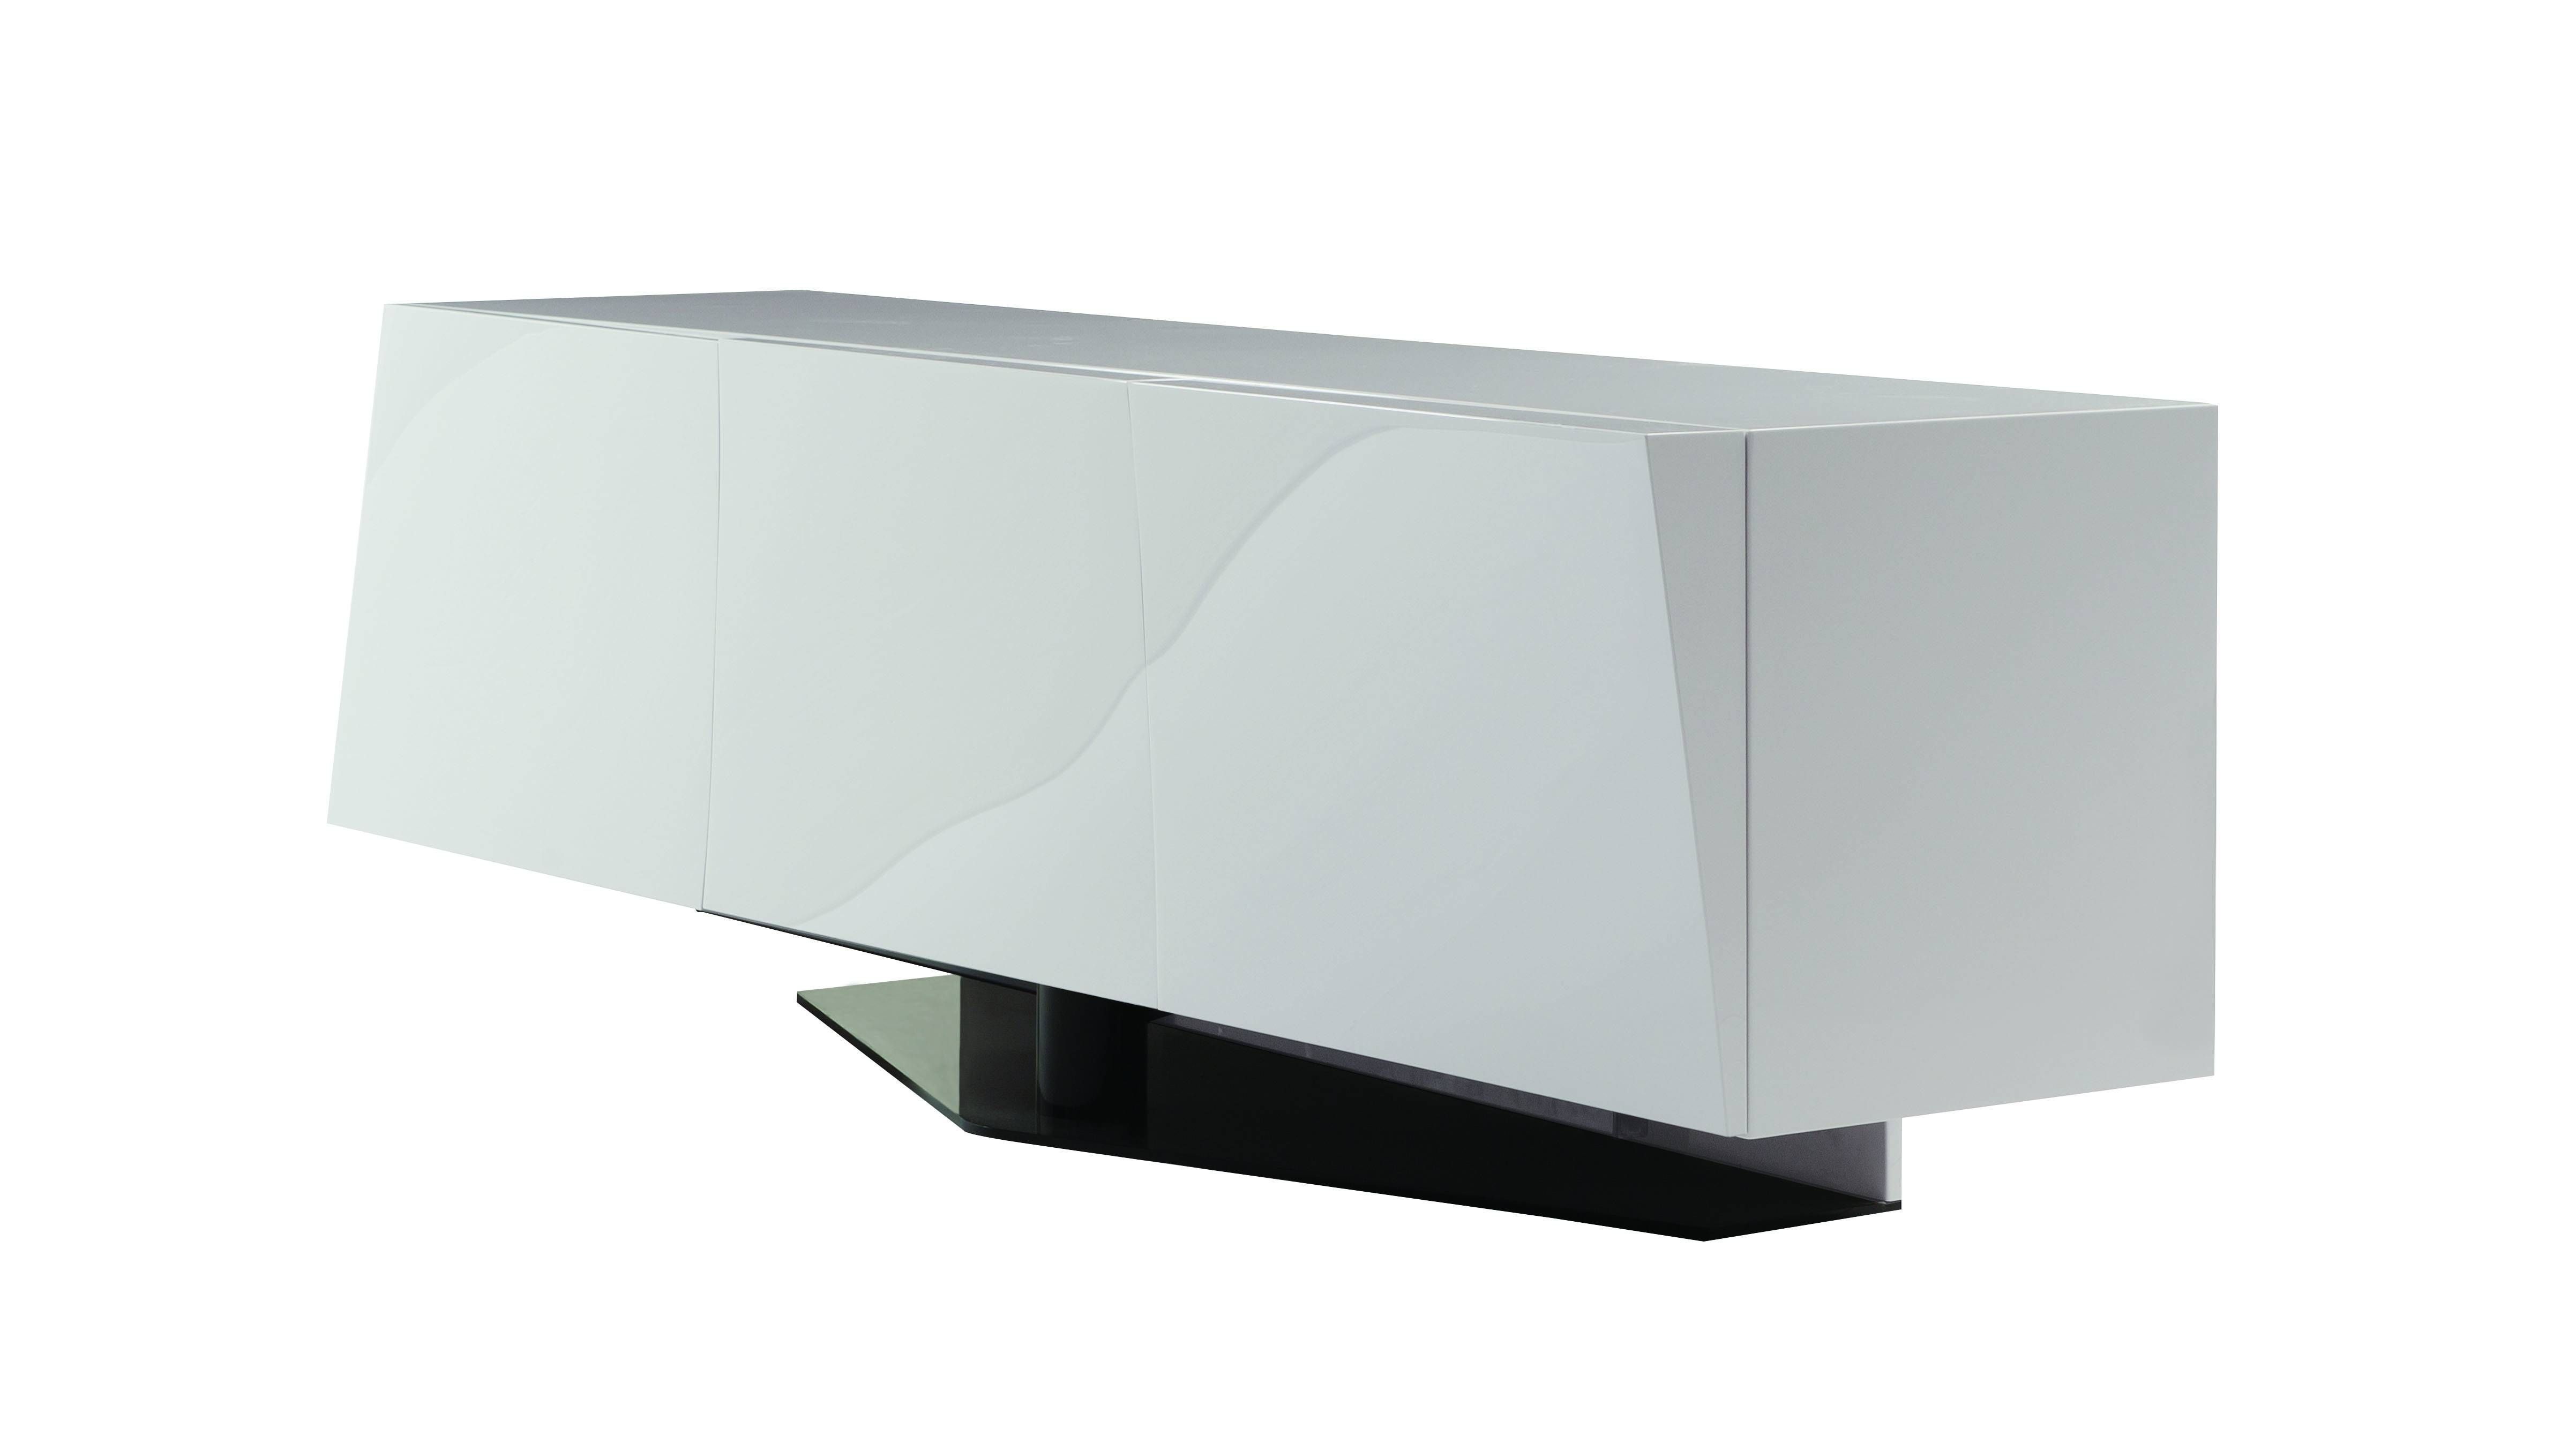 Rosace | Sideboard Les Contemporains Collectionroche Bobois For Most Up To Date Roche Bobois Sideboards (View 13 of 15)